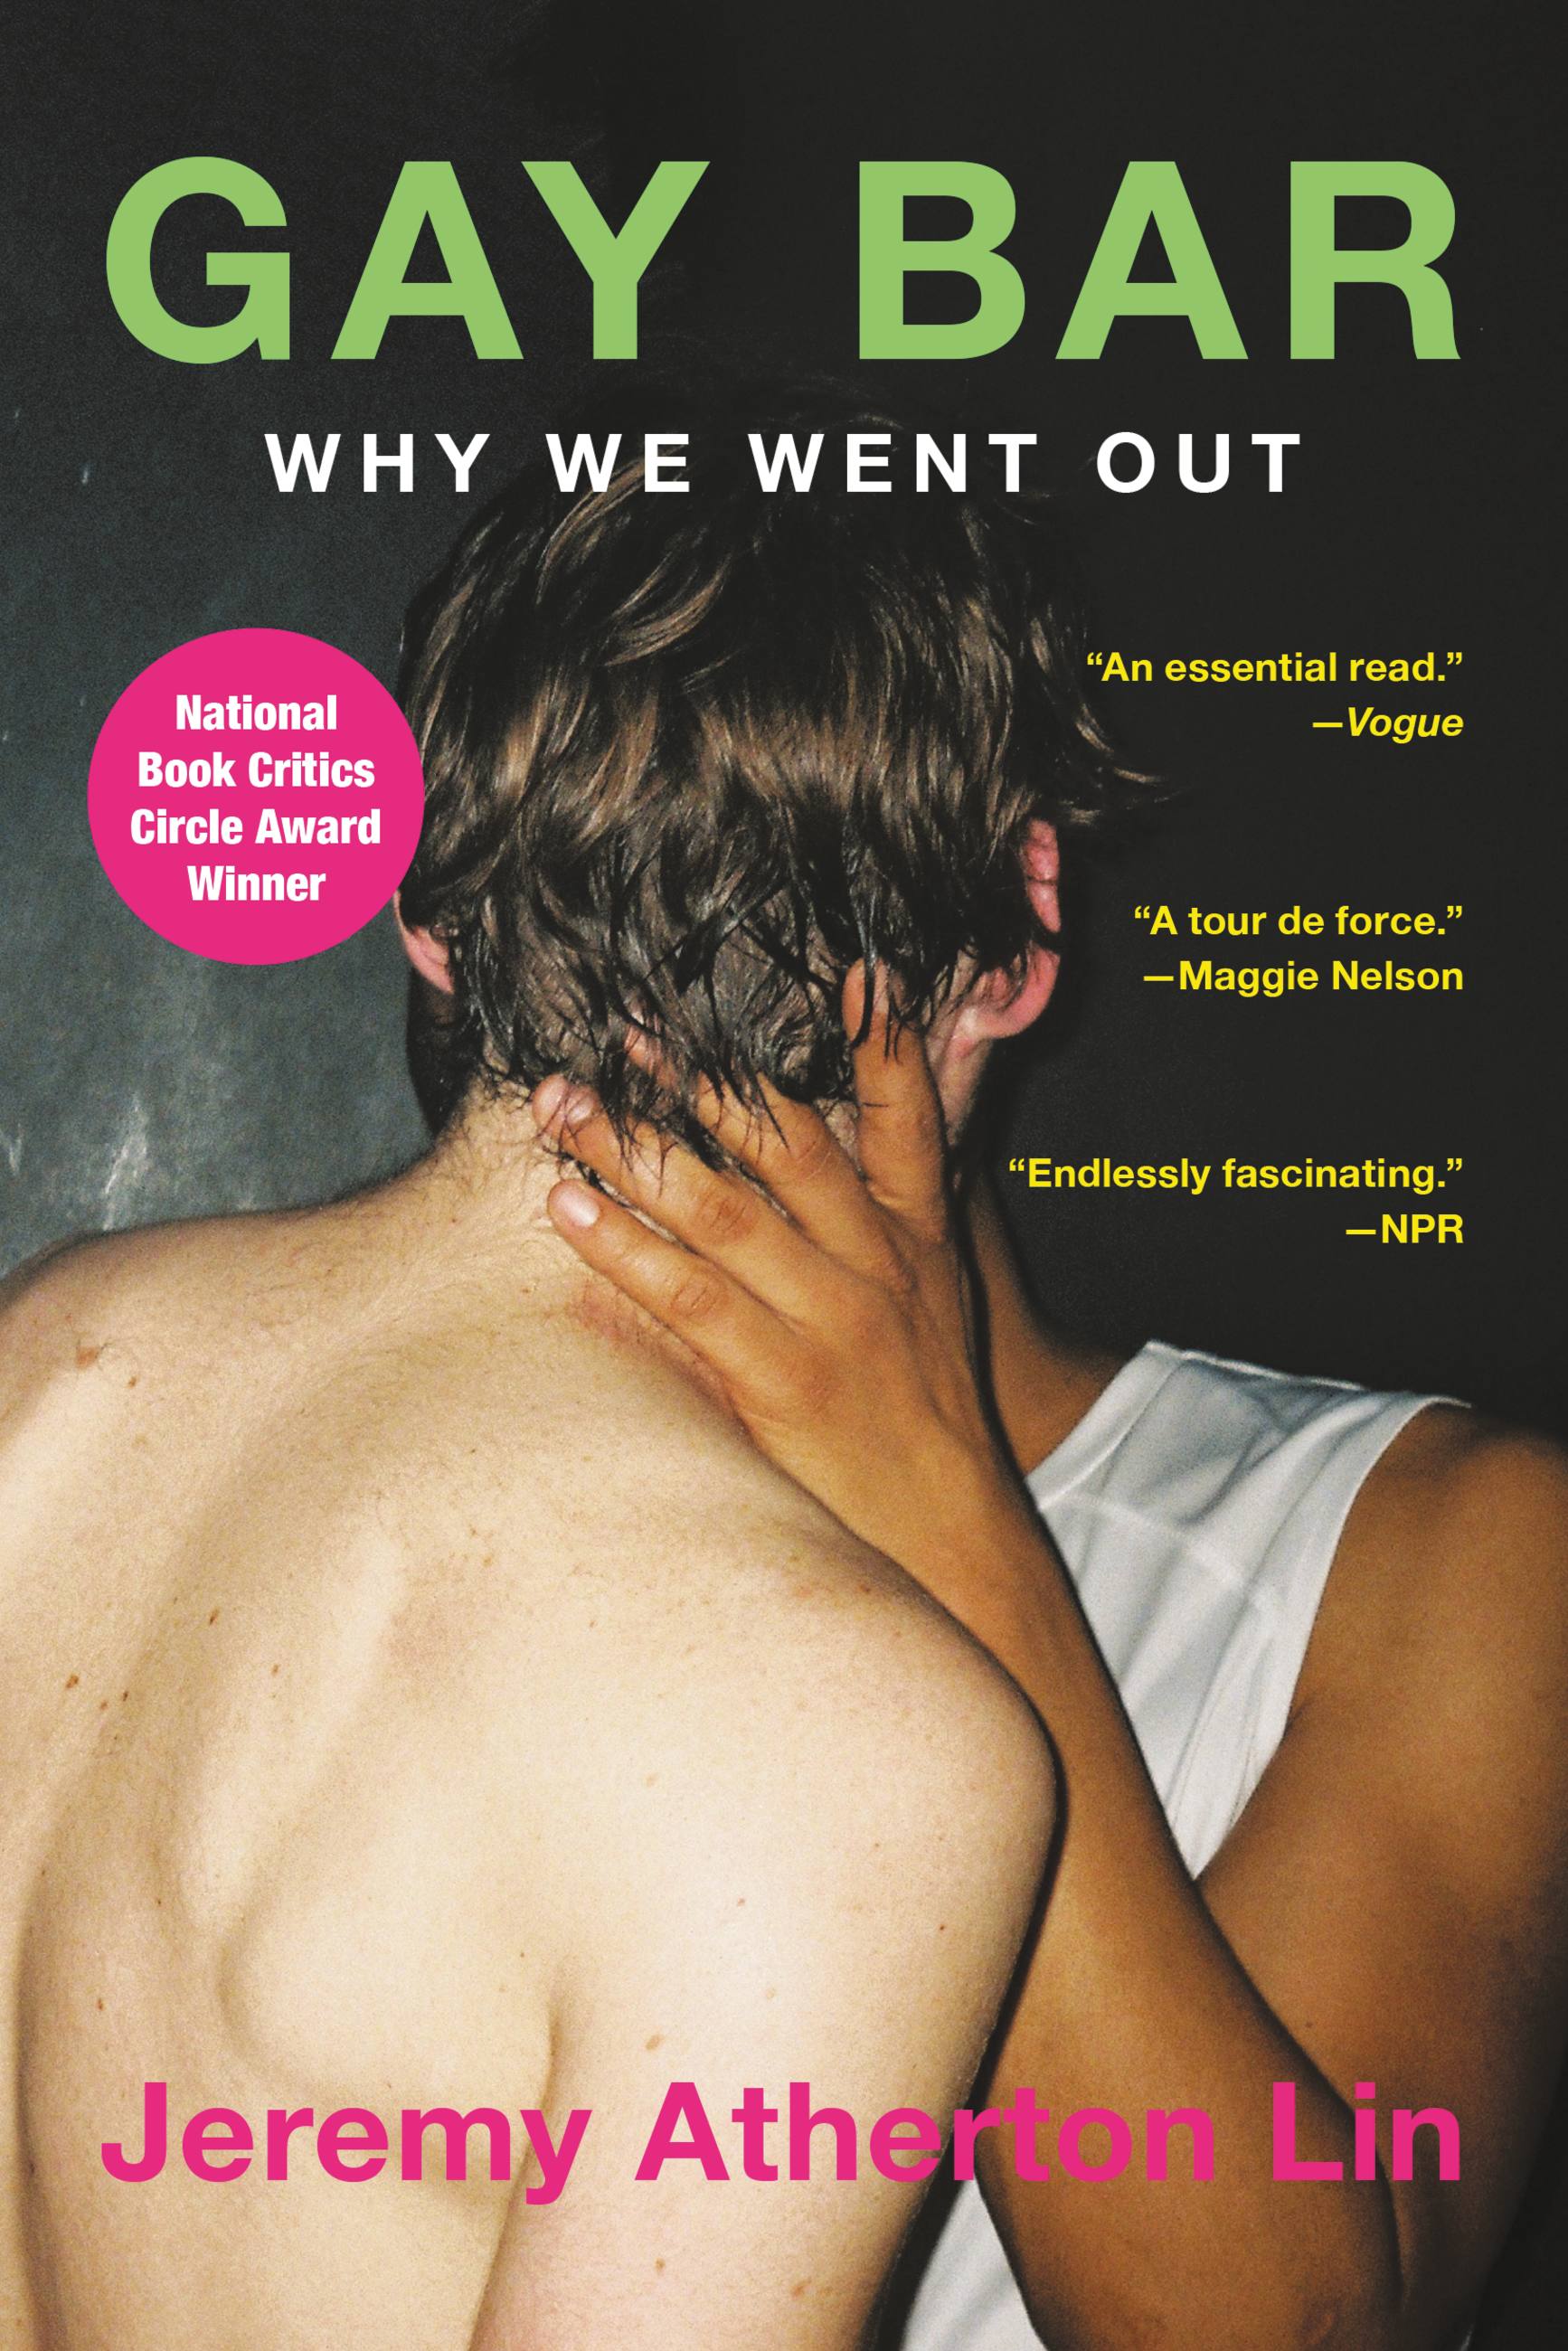 Gay Bar by Jeremy Atherton Lin Hachette Book Group pic